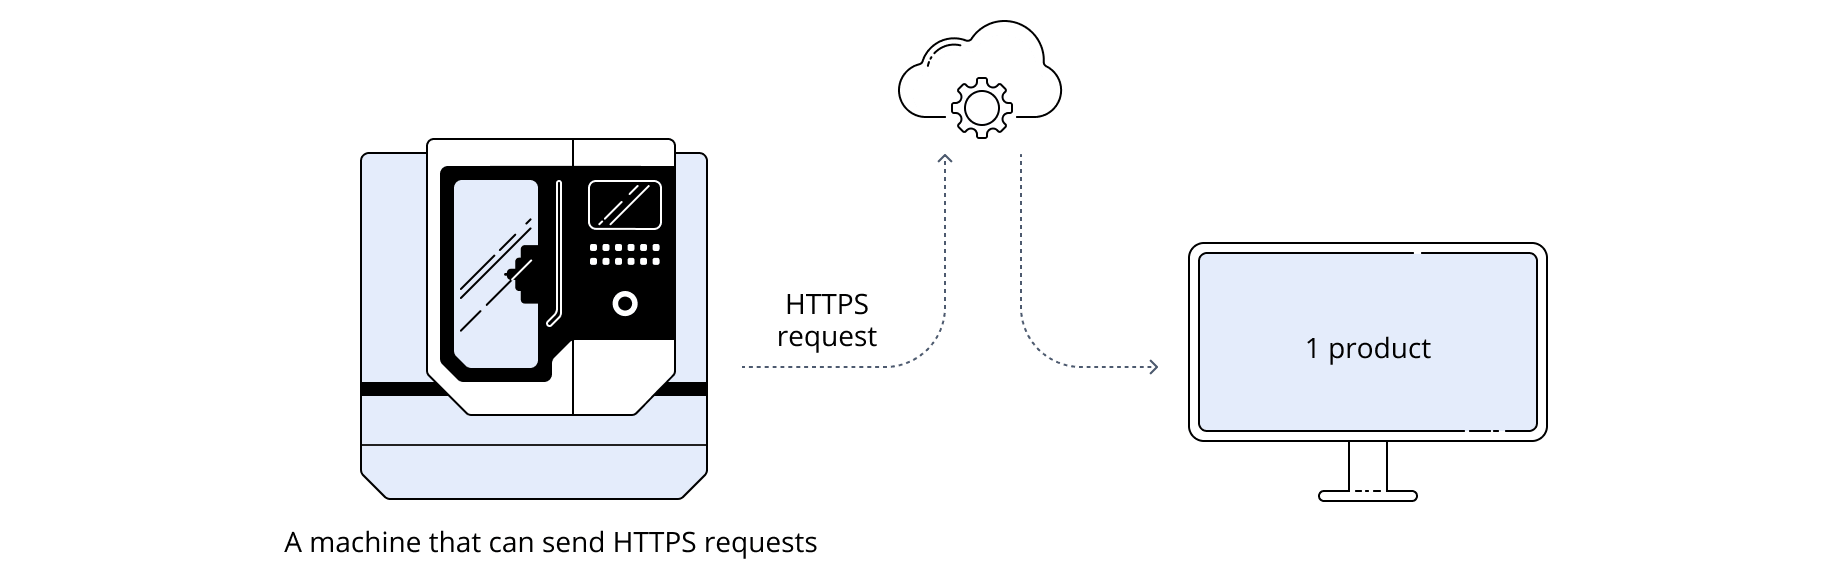 counting products by http request from machine